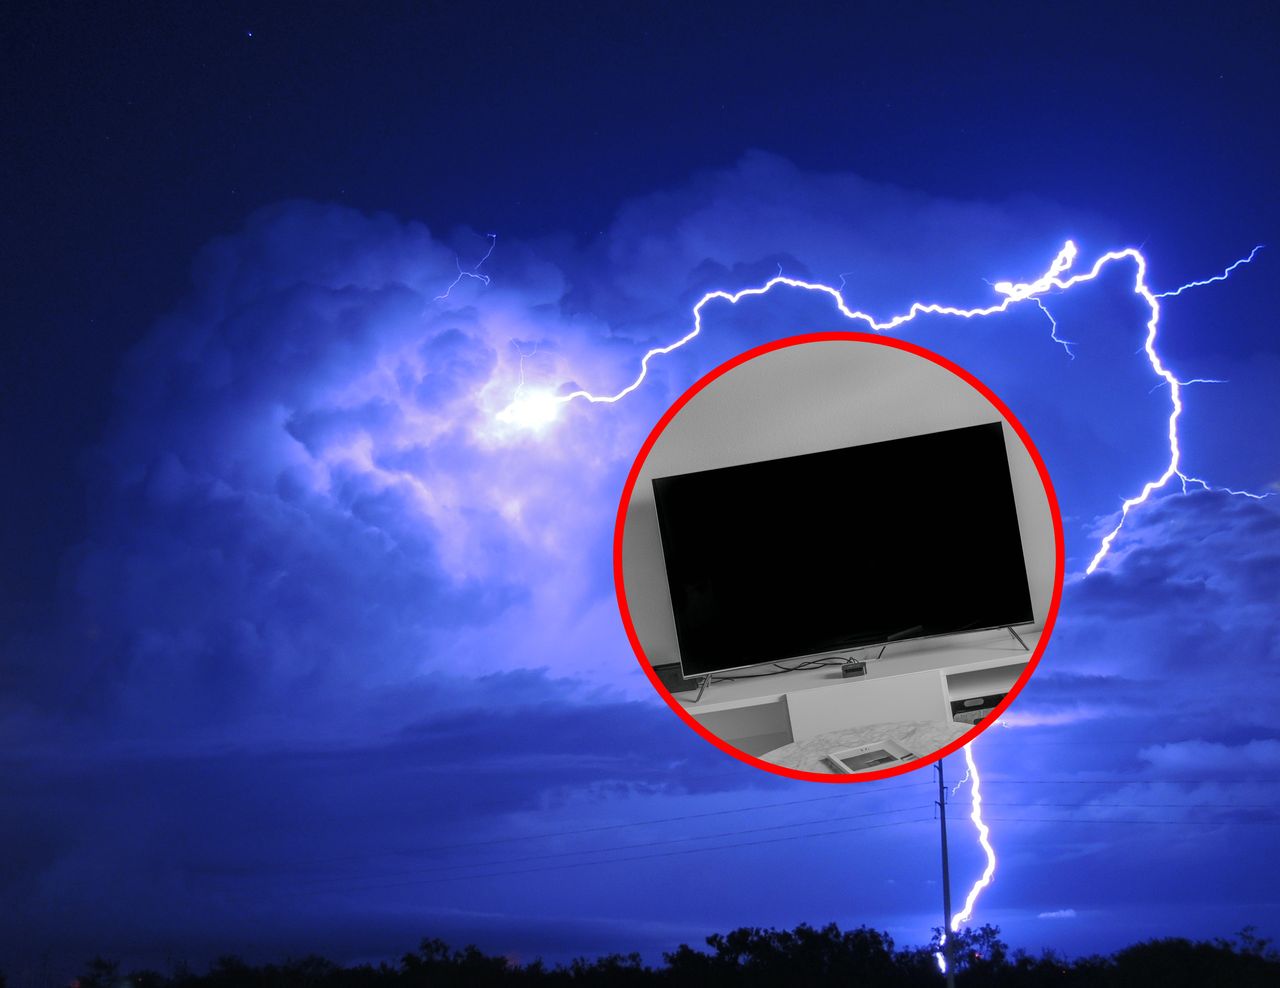 Avoid costly repairs: Unplug devices during a storm